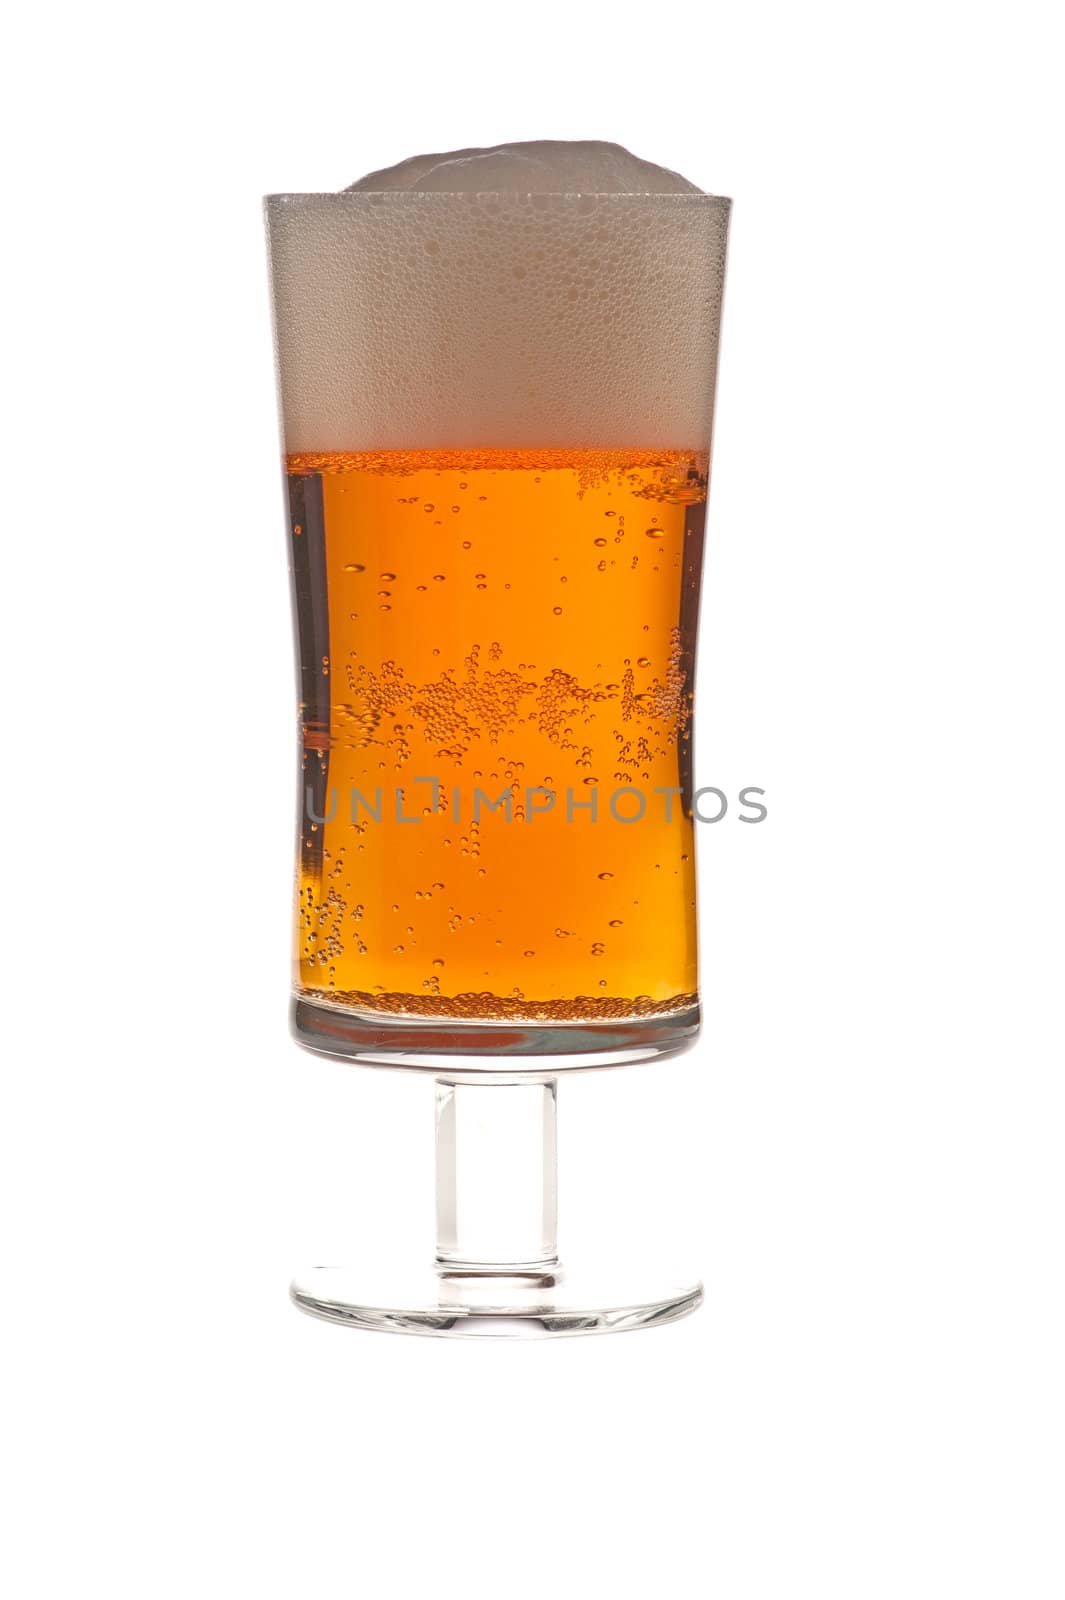 G;ass of beer image on white background